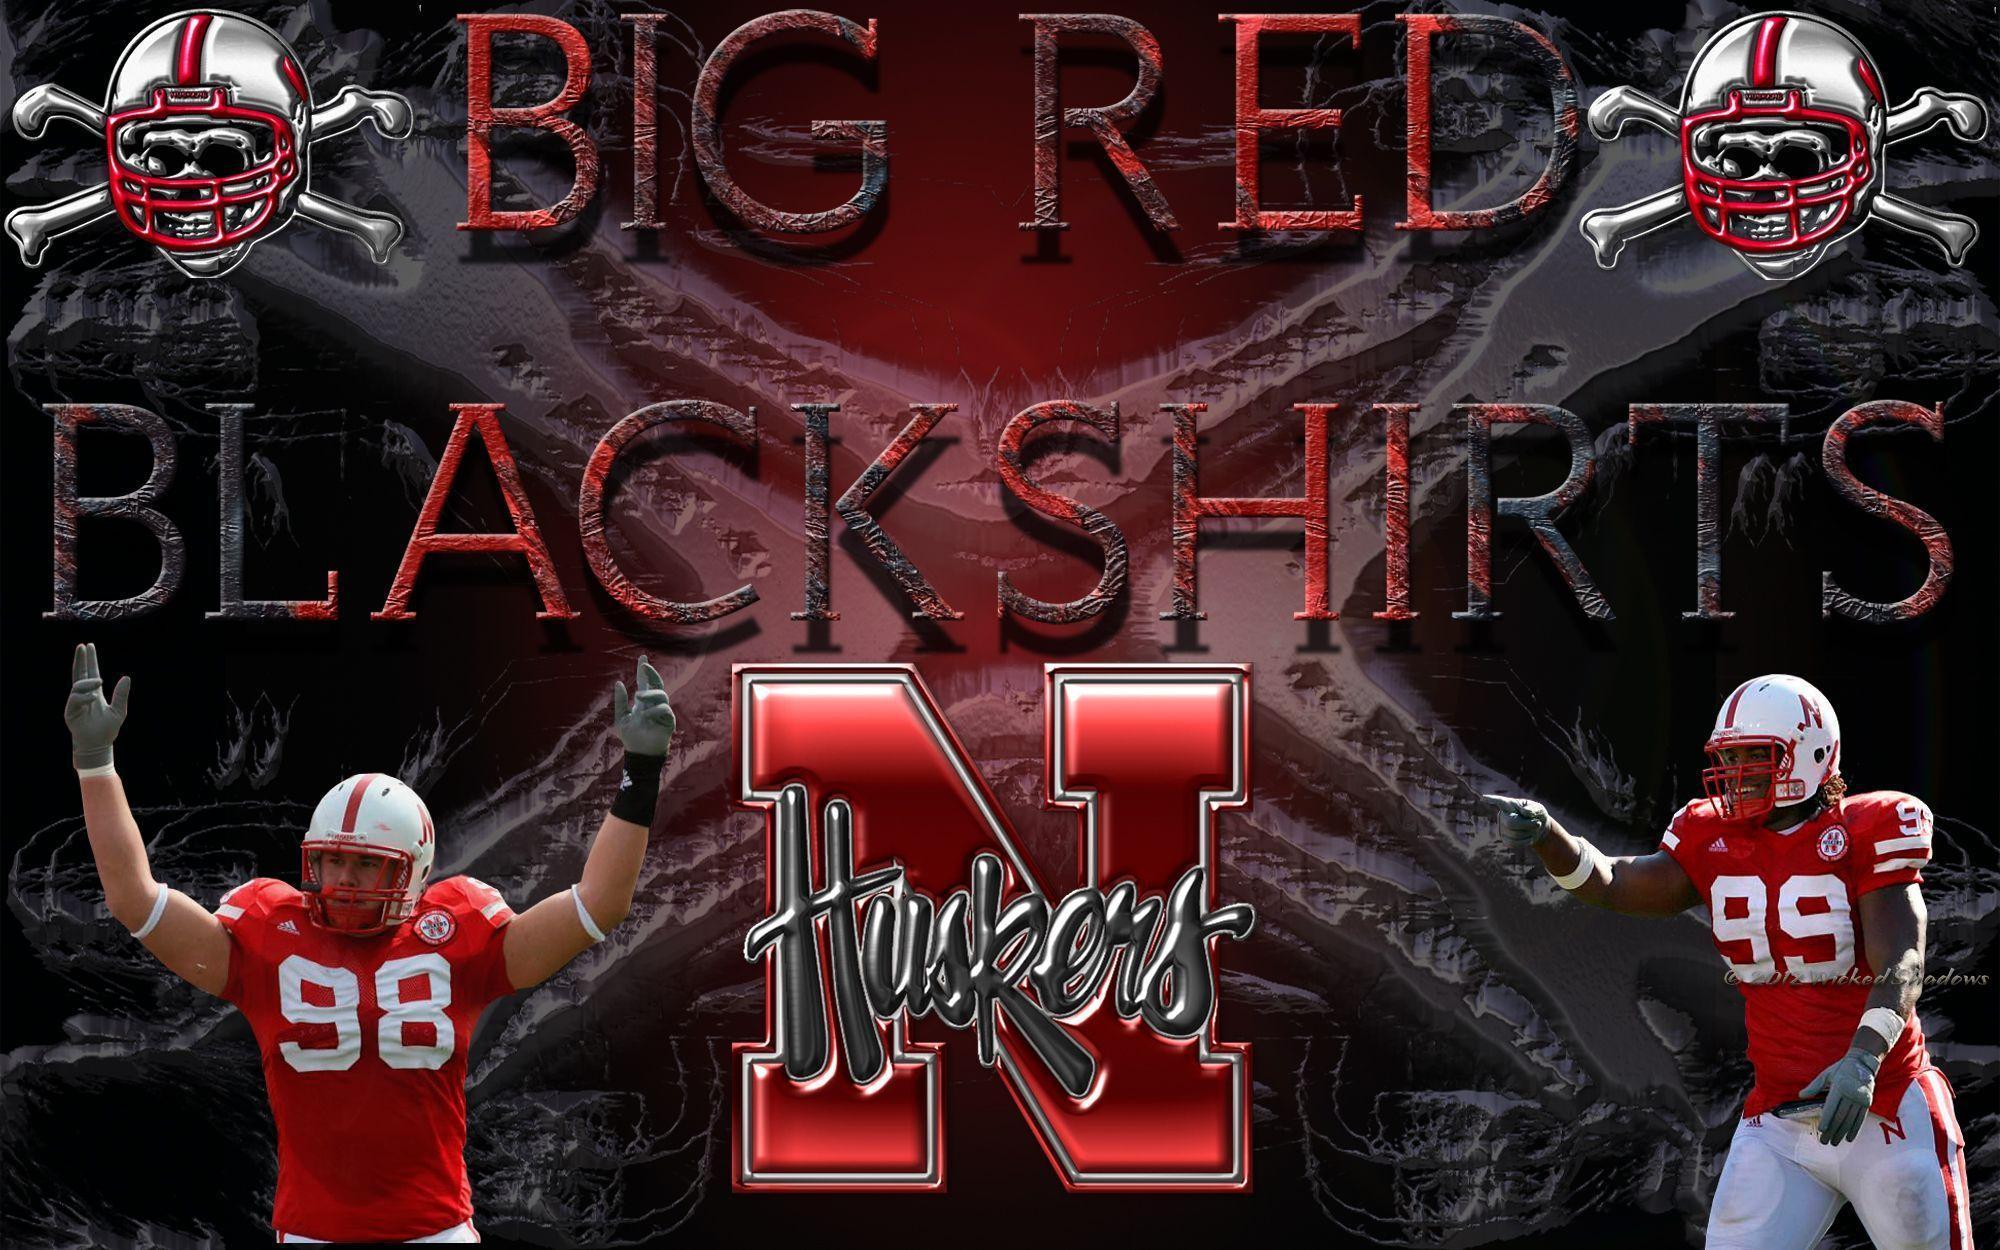 Wallpaper By Wicked Shadows: Huskers Big Red Blackshirts Wallpaper